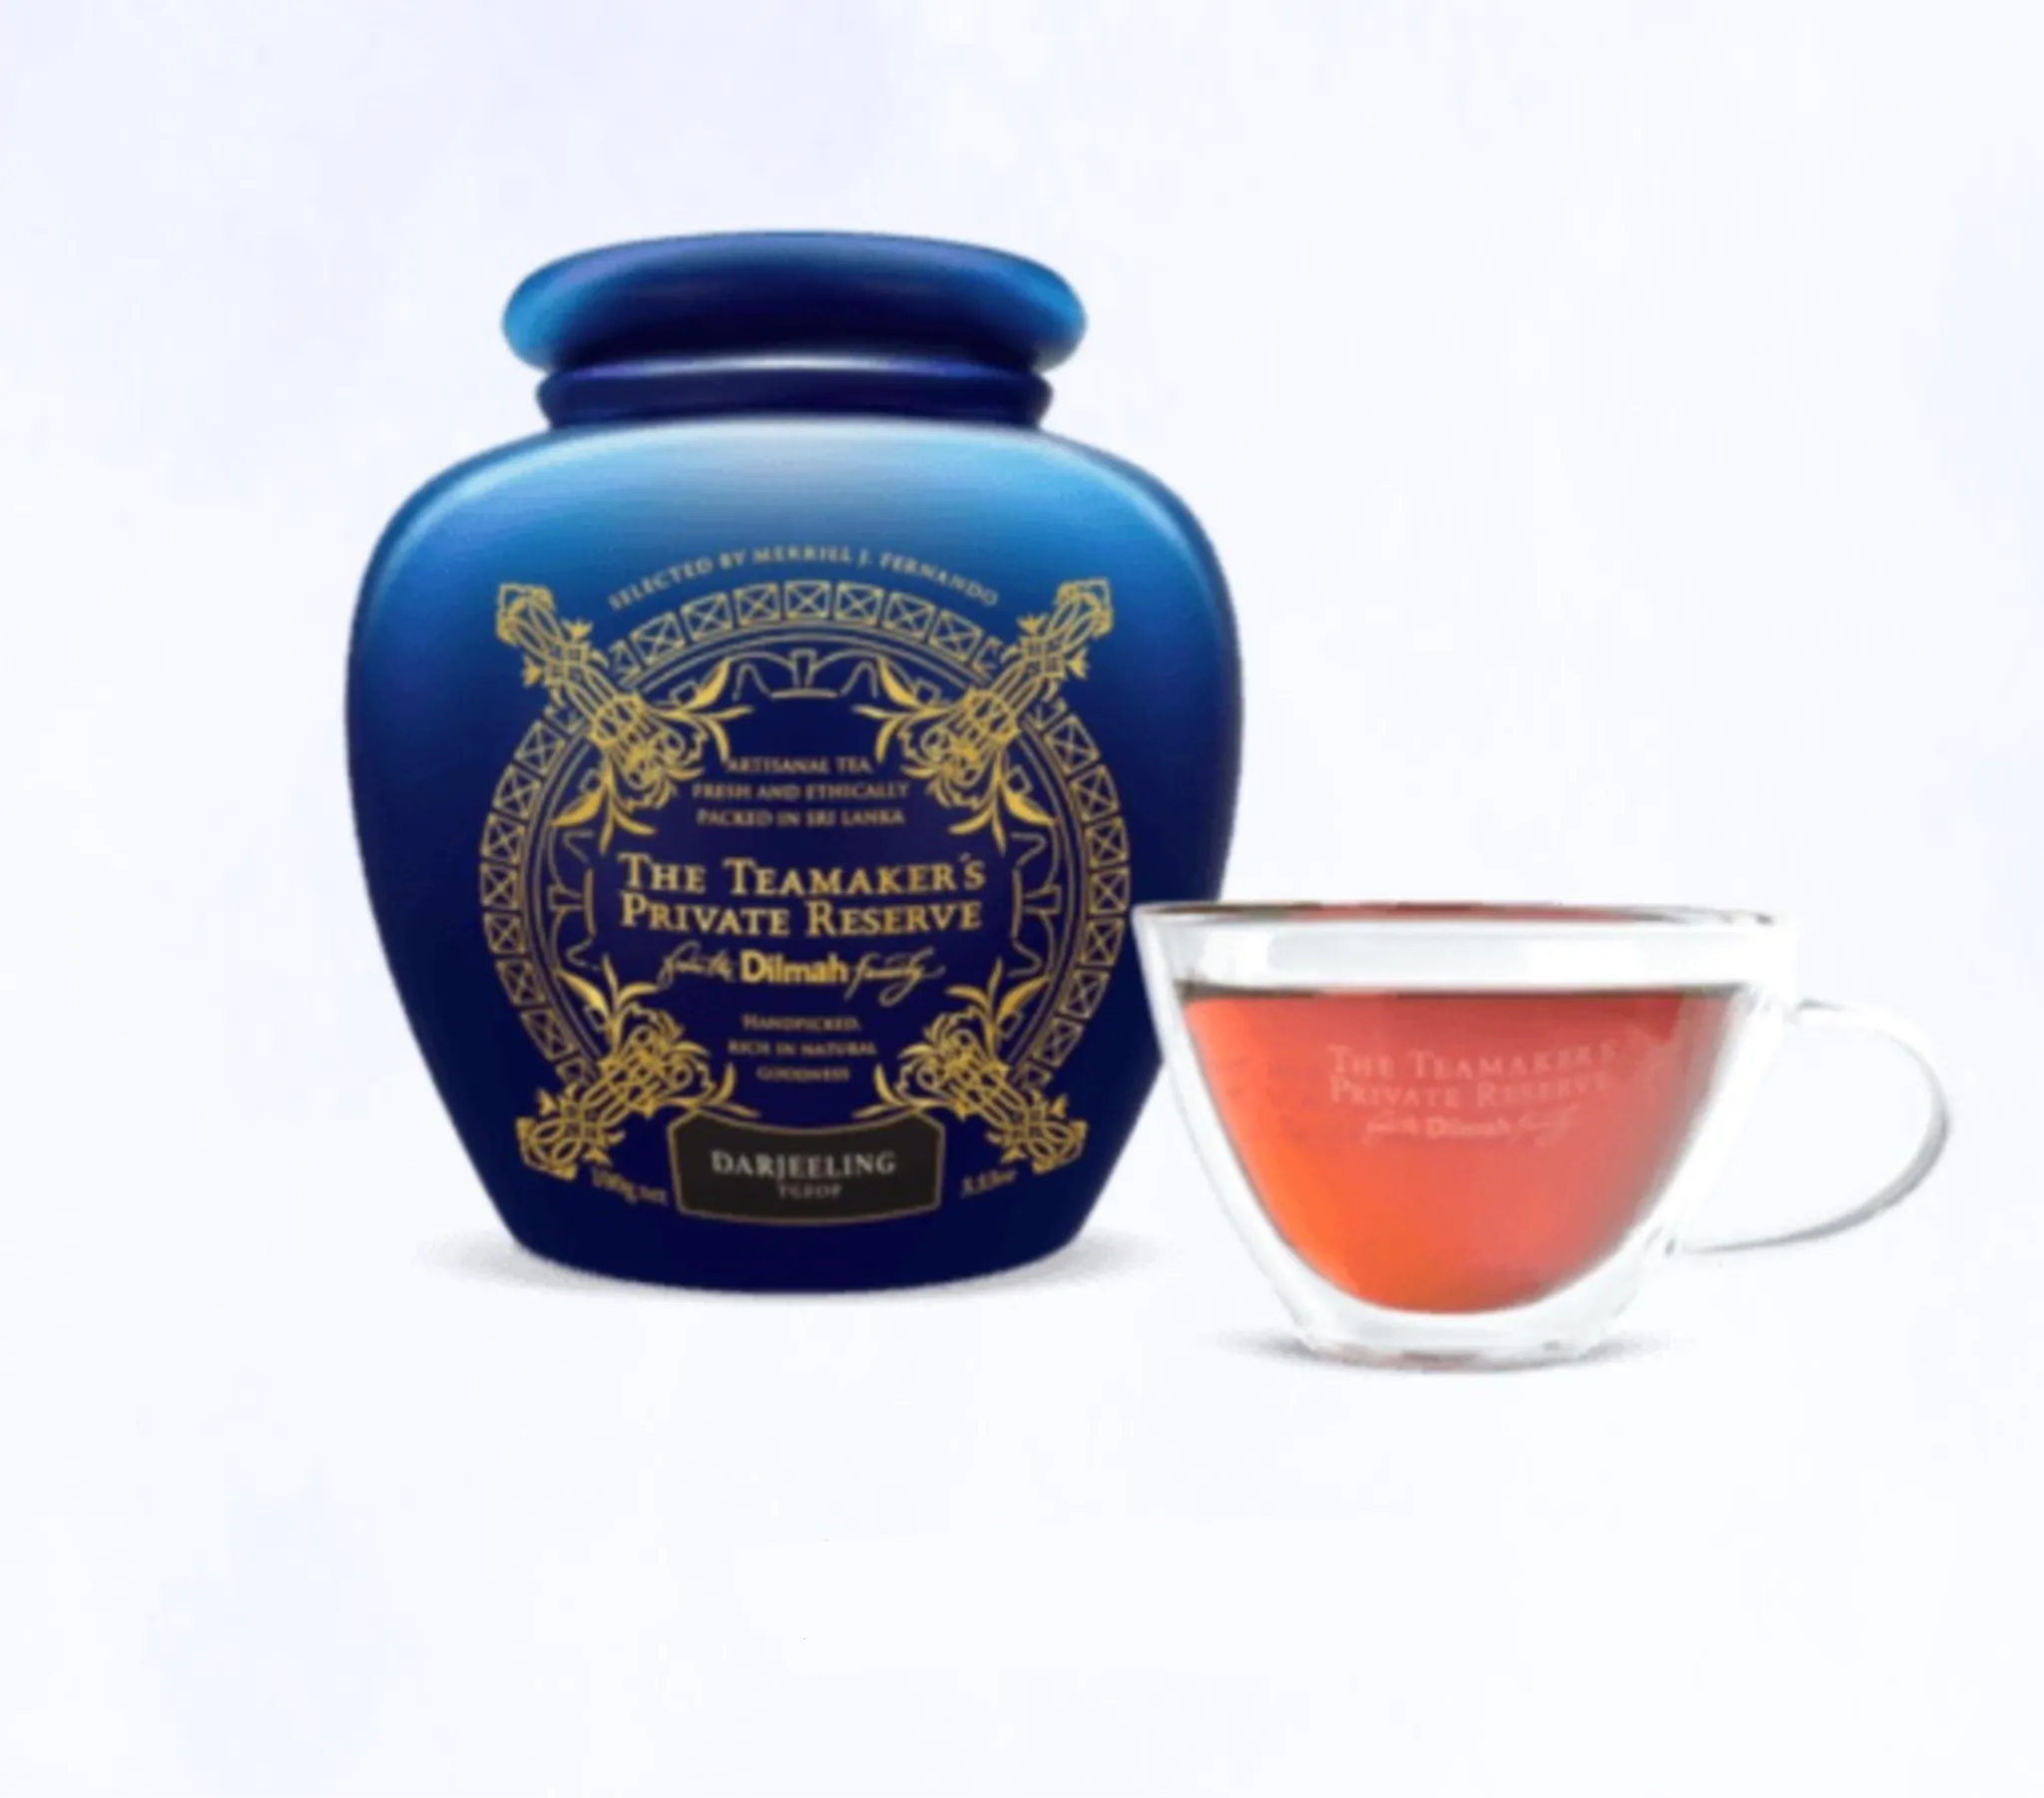 jar of Darjeeling TGFOP tea-maker's private reserve with a cup of it